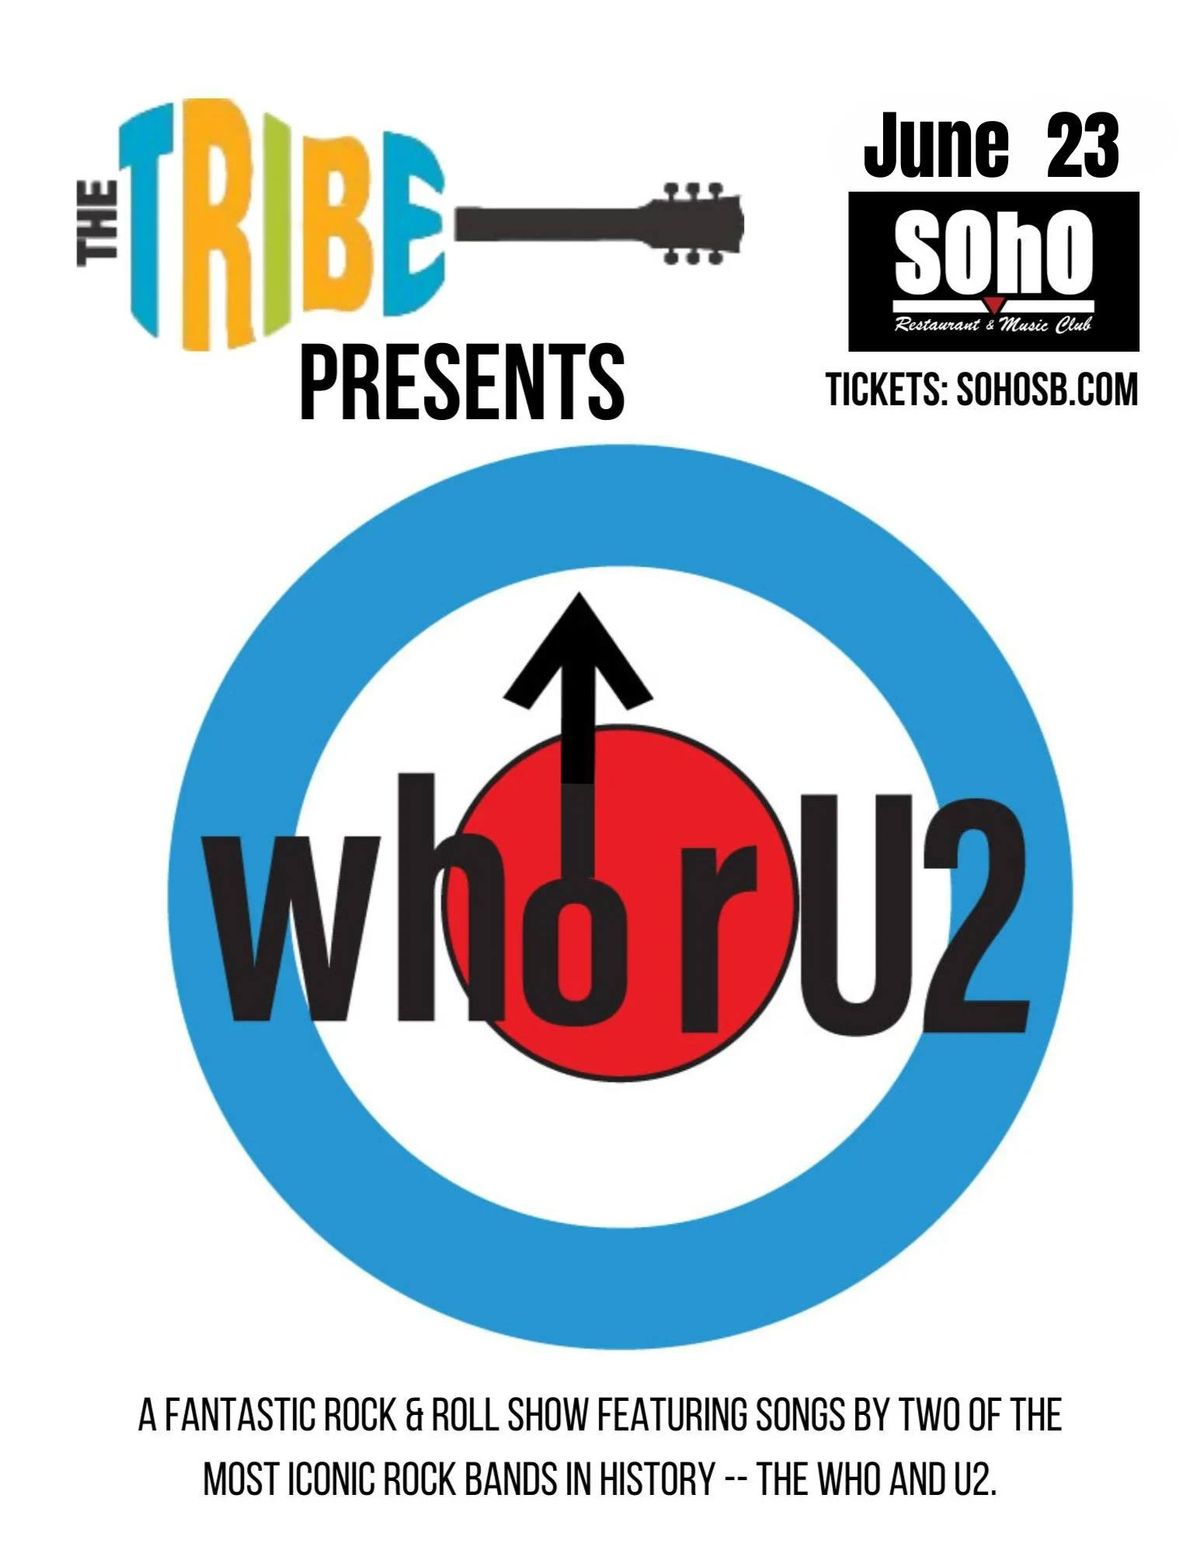 WHORU2 presented by The Tribe